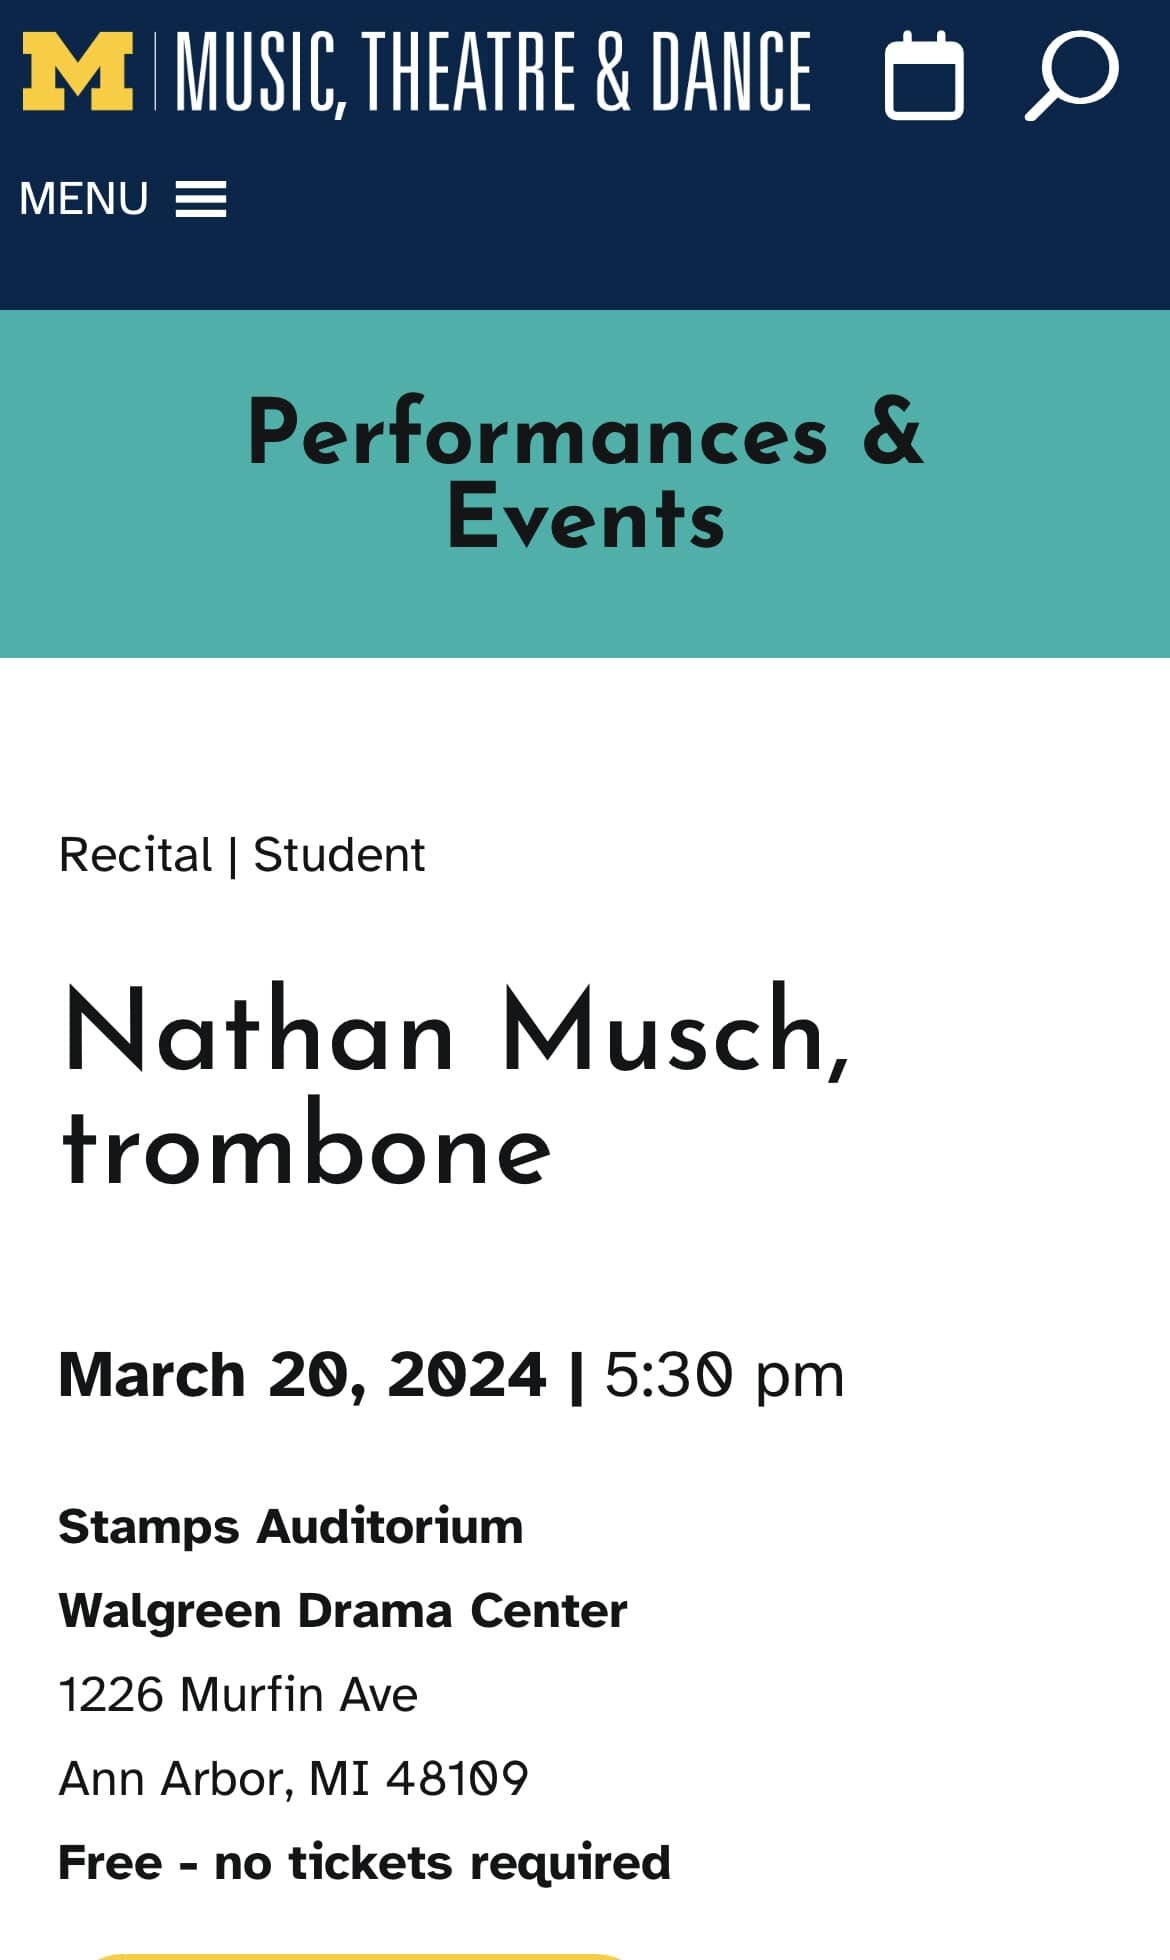 NASA Biennial reflection post coming soon, but for now, I can&rsquo;t quite express how thrilled I am to see one of my concert pieces performed at my Alma mater, the University of Michigan.

Trombonist and U-M DMA student Nathan Musch will be perform